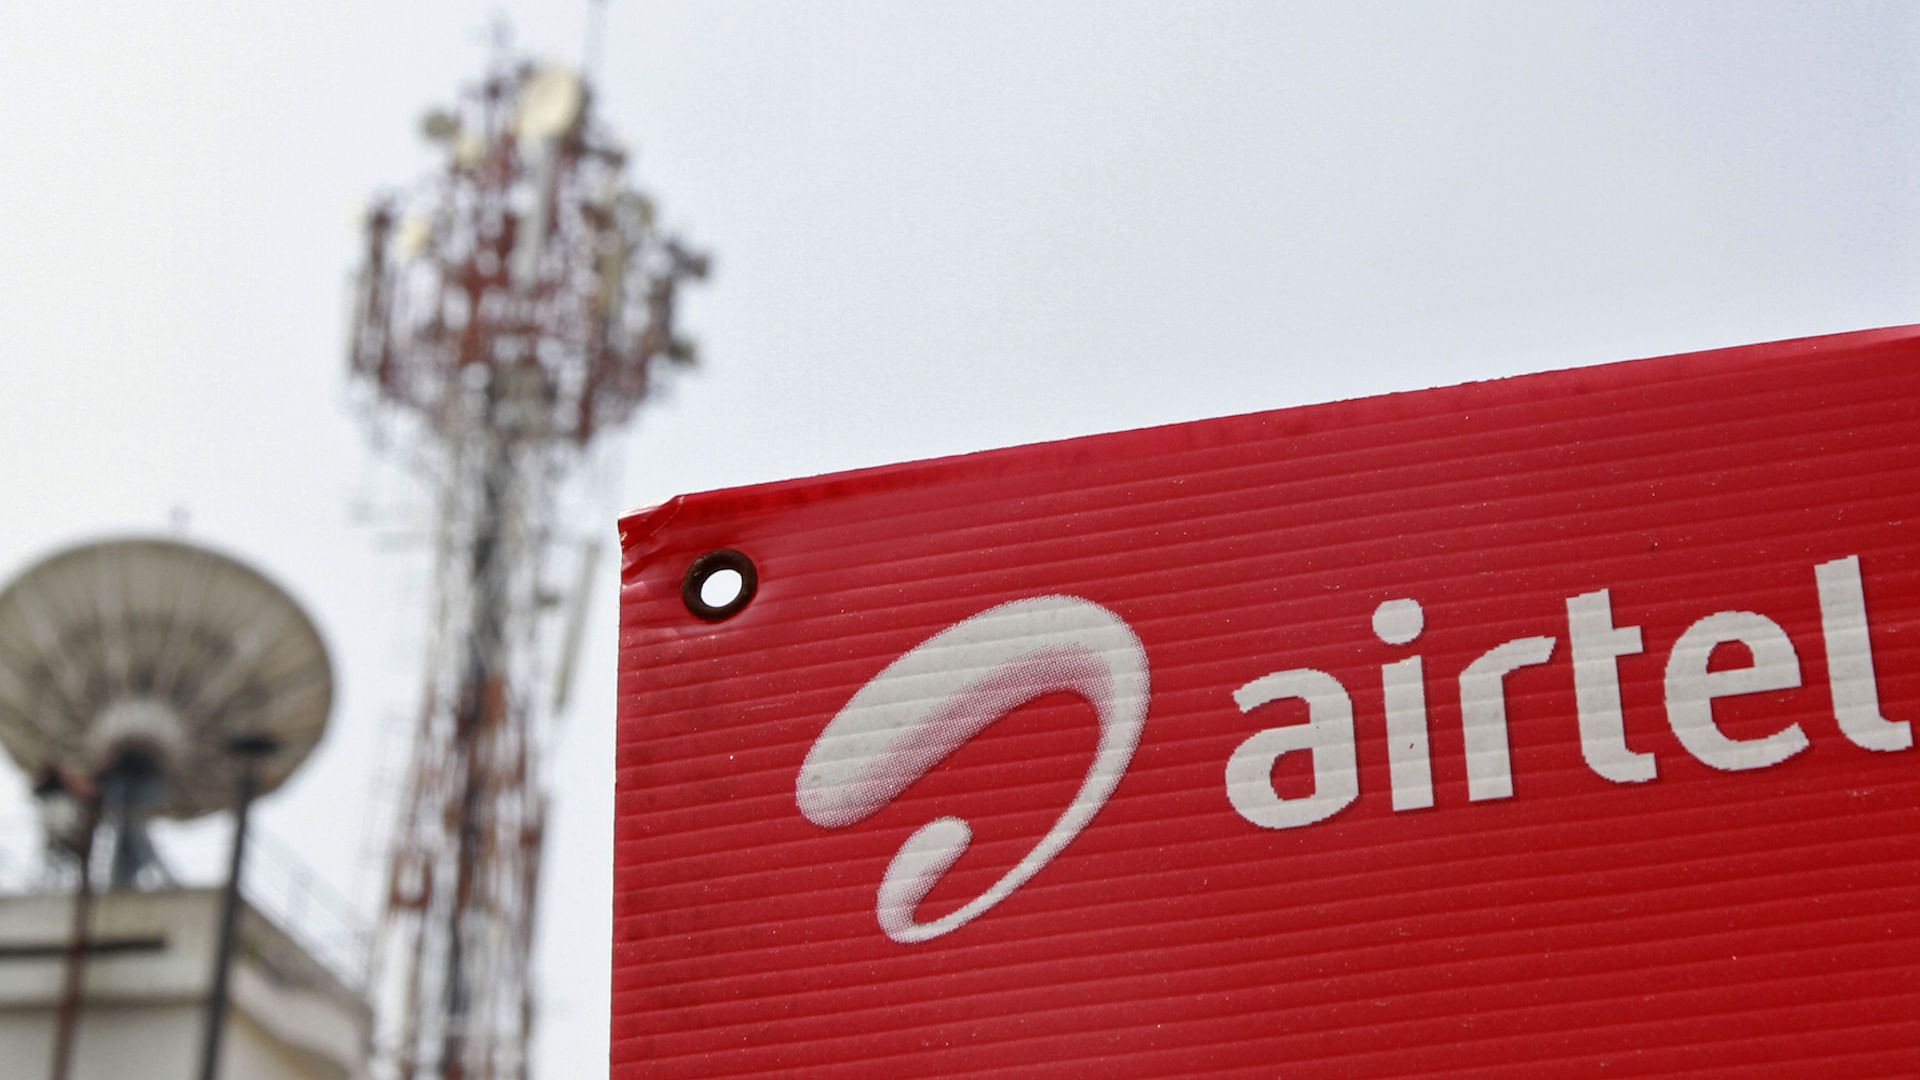 Telecom operator Tata Teleservices said the Department of Telecom (DoT) has approved the merger of its consumer mobile business with Bharti Airtel<a href="https://www.business-standard.com/topic/bharti-airtel">.</a><a href="https://www.business-standard.com/topic/tata-teleservices"><br></a>